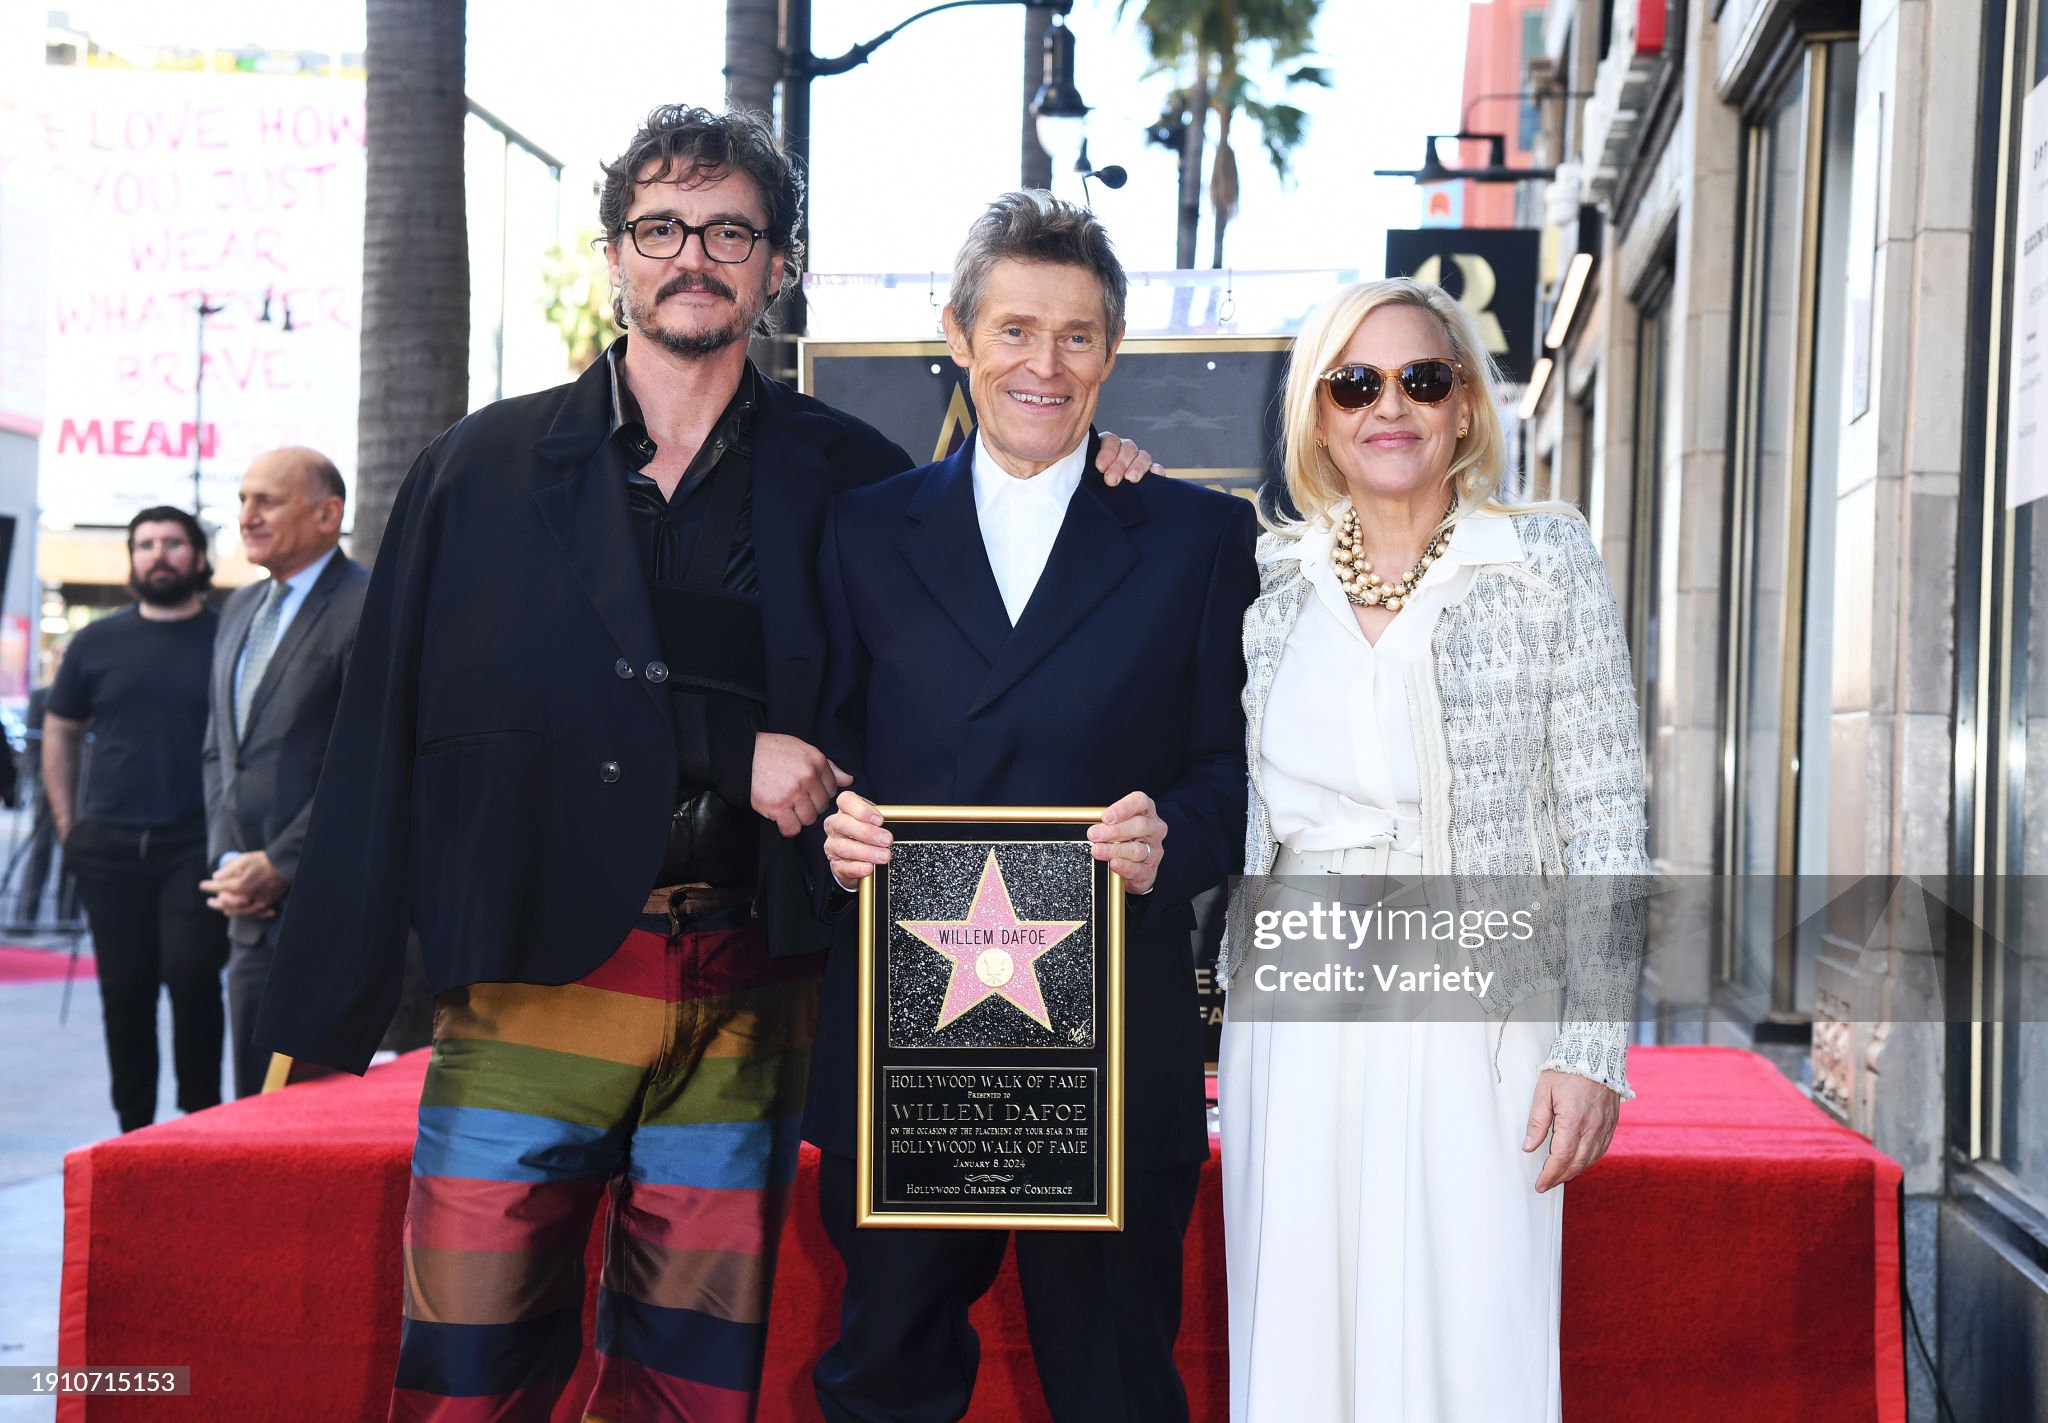 willem-dafoe-honored-with-star-on-the-hollywood-walk-of-fame.jpg